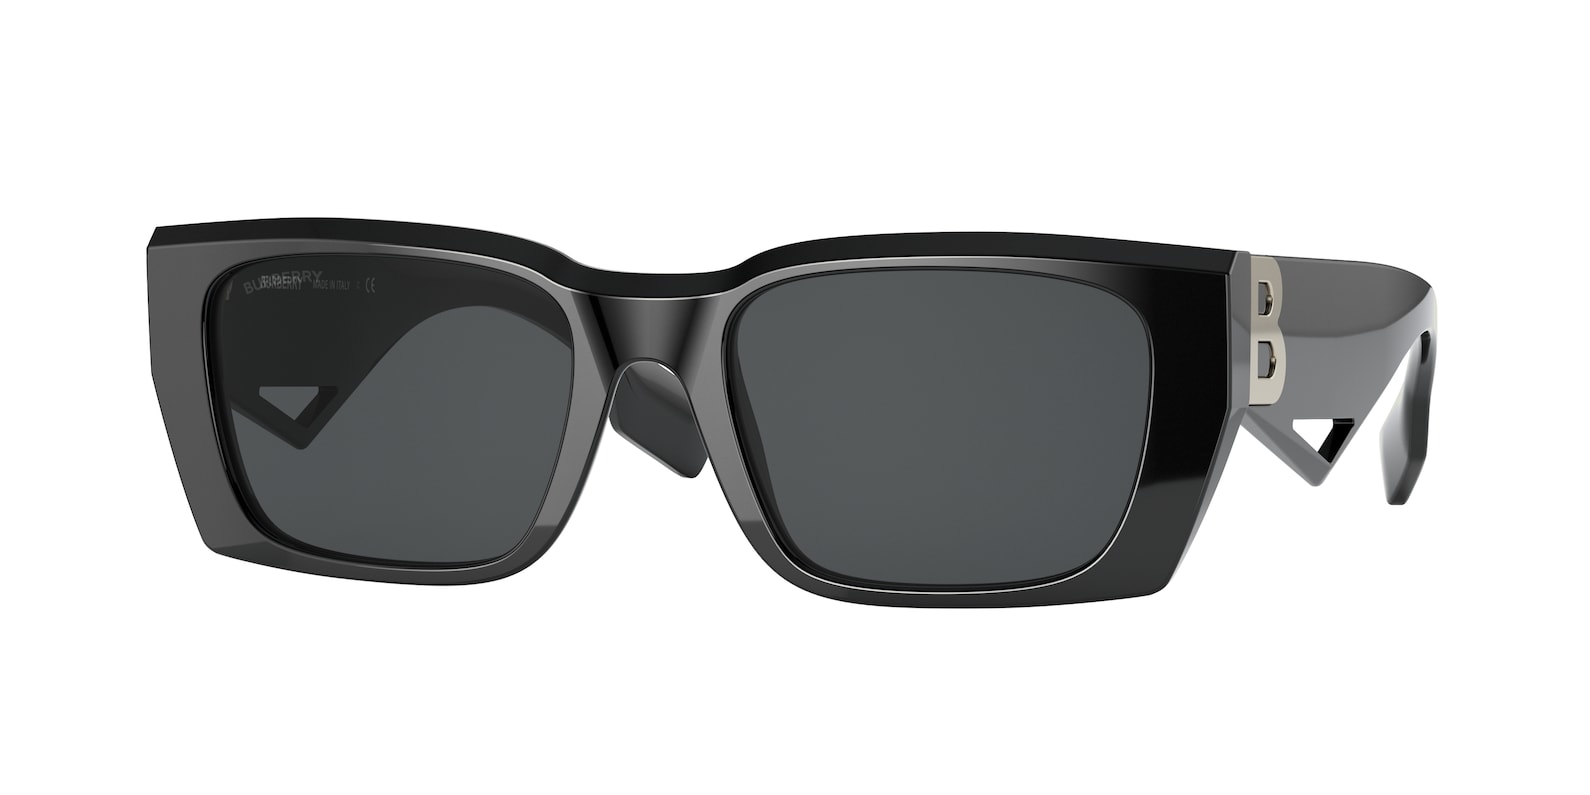 A Black Color Frame With Black Shades